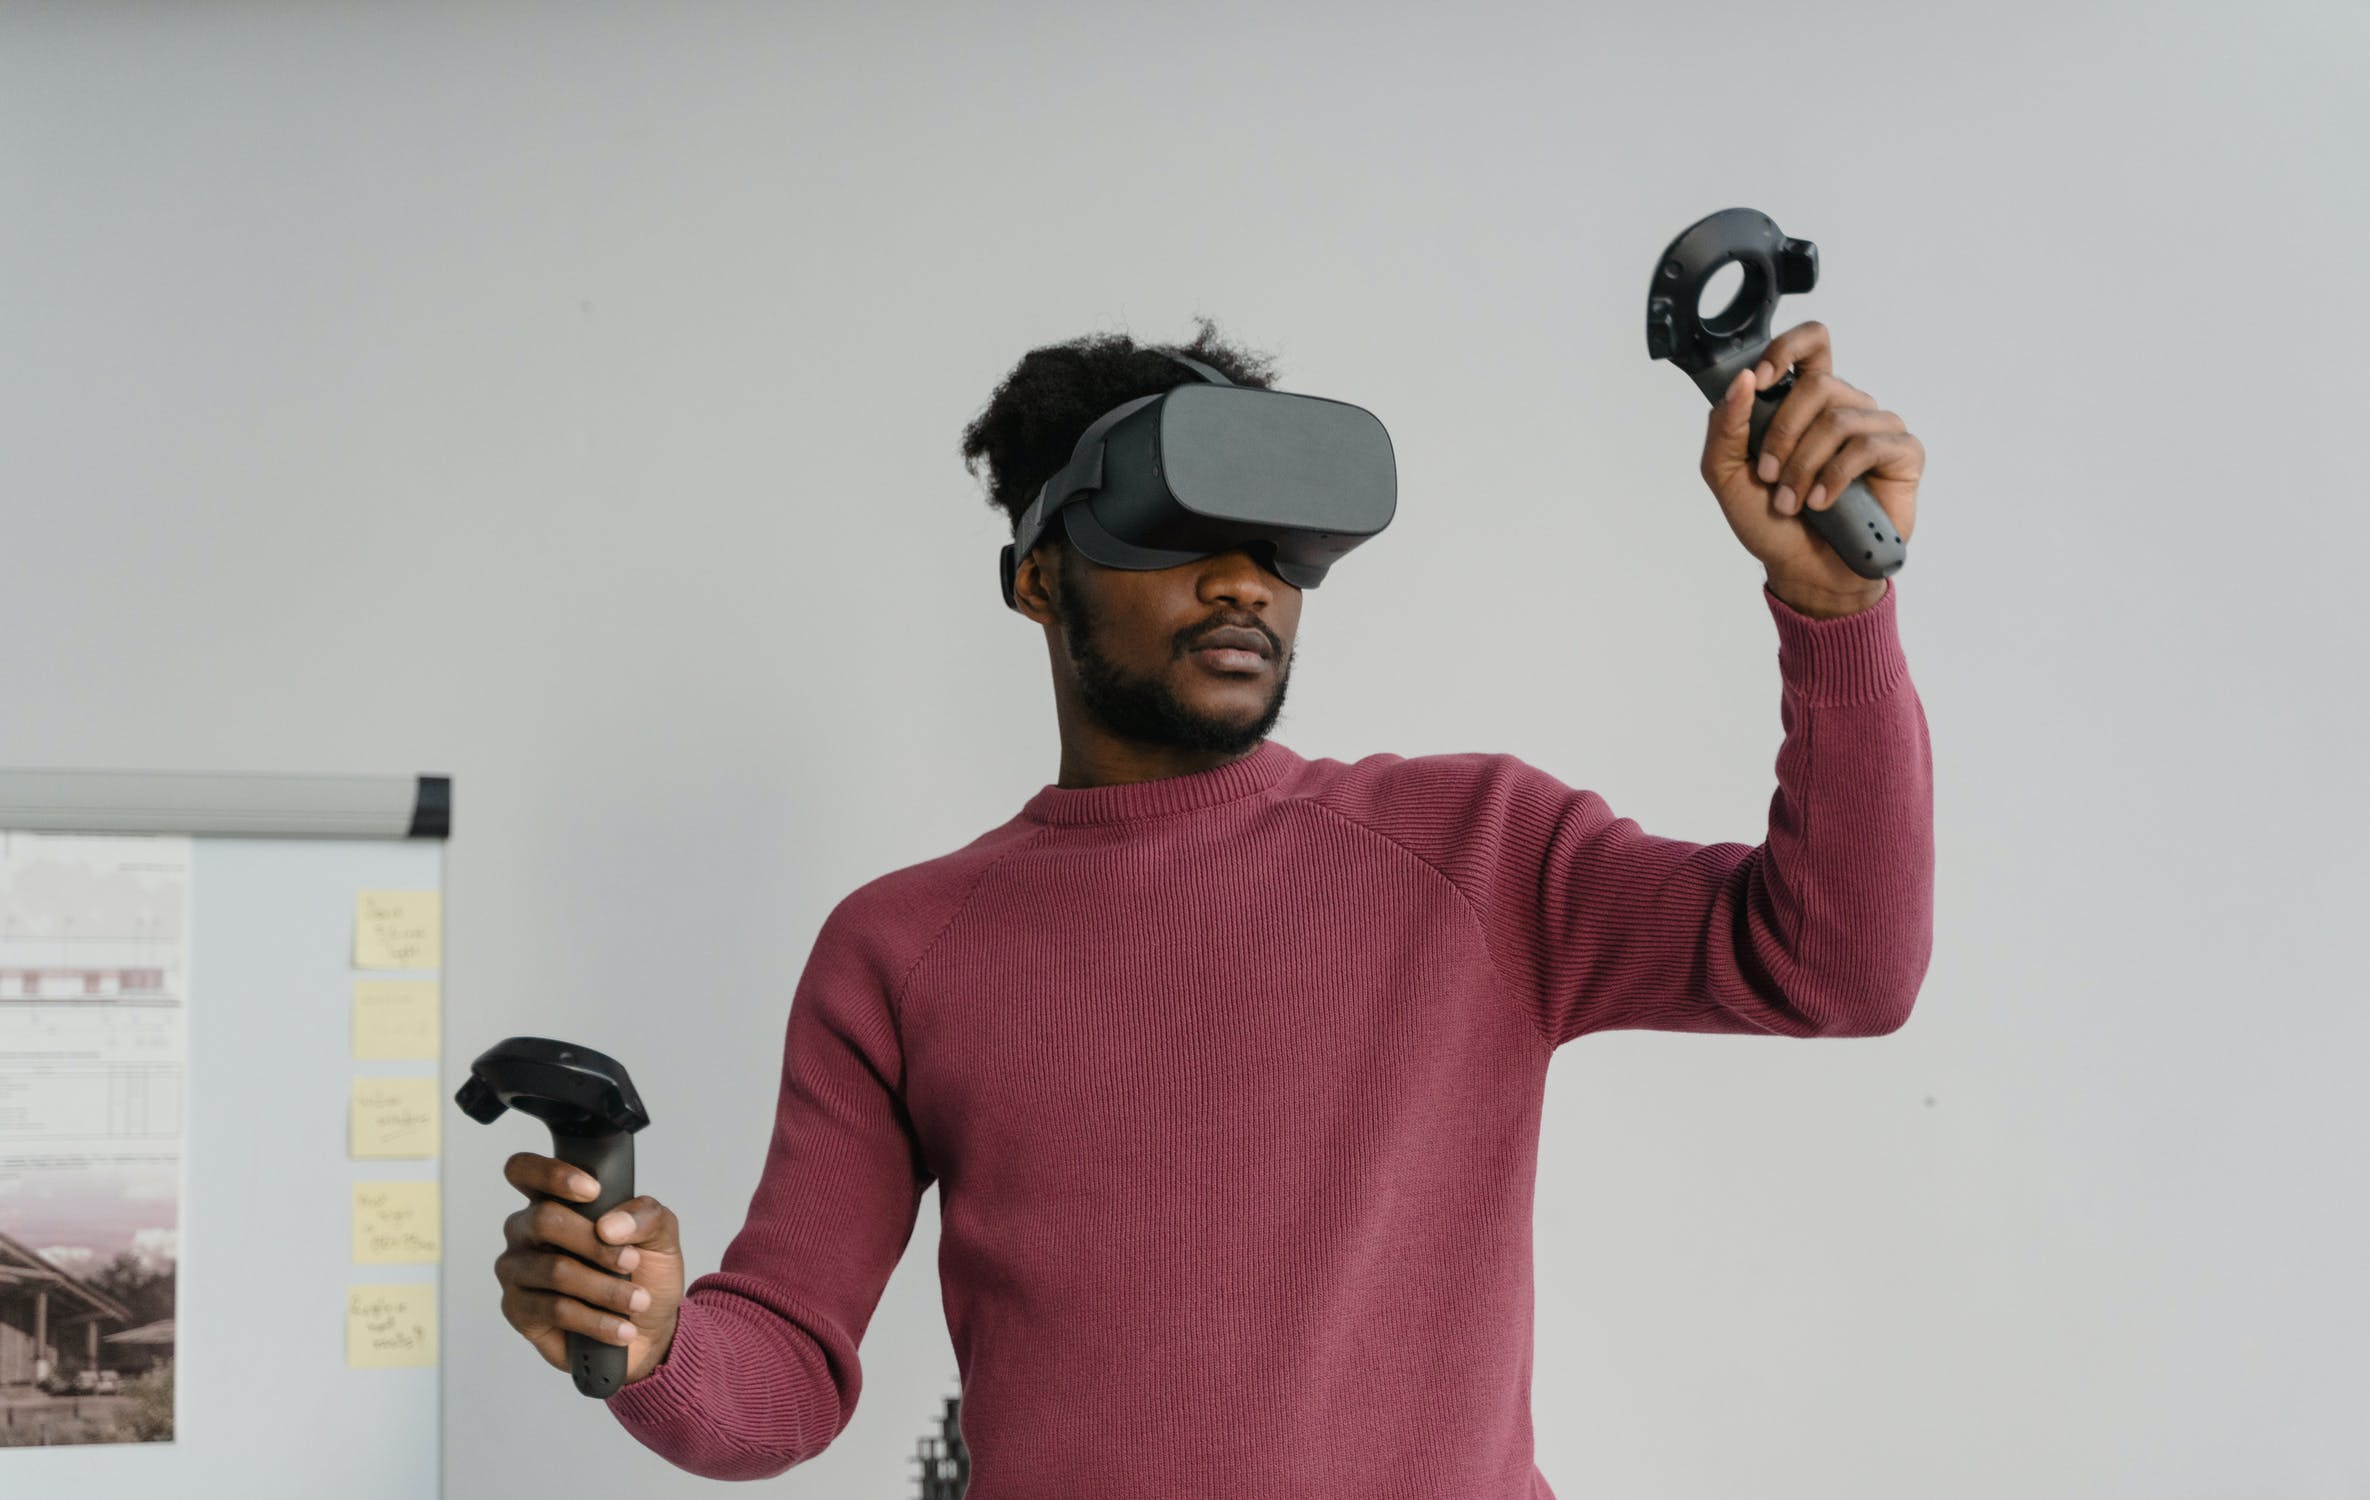 virtual reality, VR, gaming industry, vr game development, VR training, VR, Virtual Reality, VR training headset solutions, Virtual reality headset solution, VR headset, Virtual reality headset